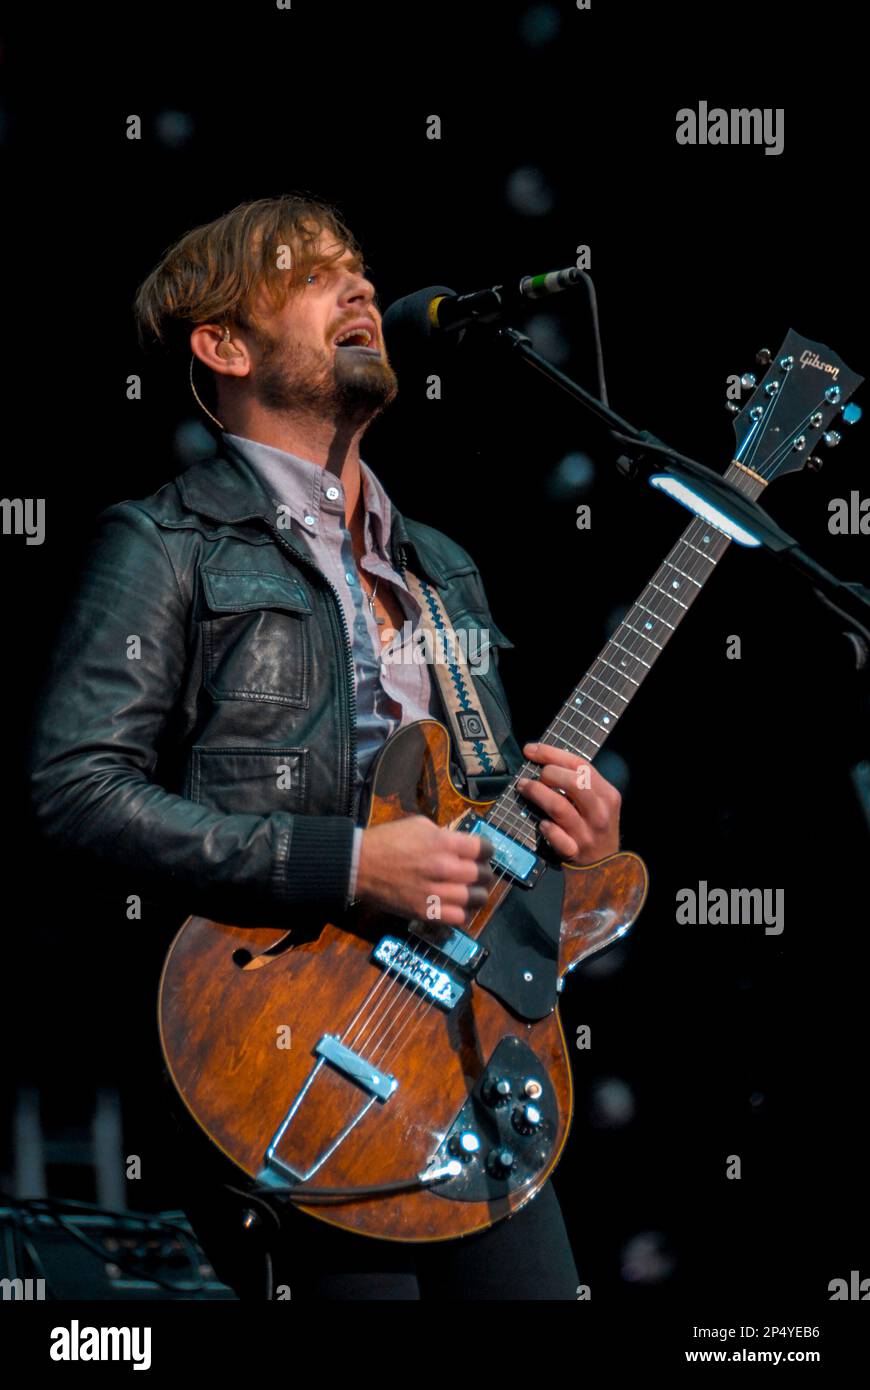 Caleb Followill - Kings of Leon, V2008, Hylands Park, Chelmsford, Essex, Britain - 17 August 2008 Stock Photo